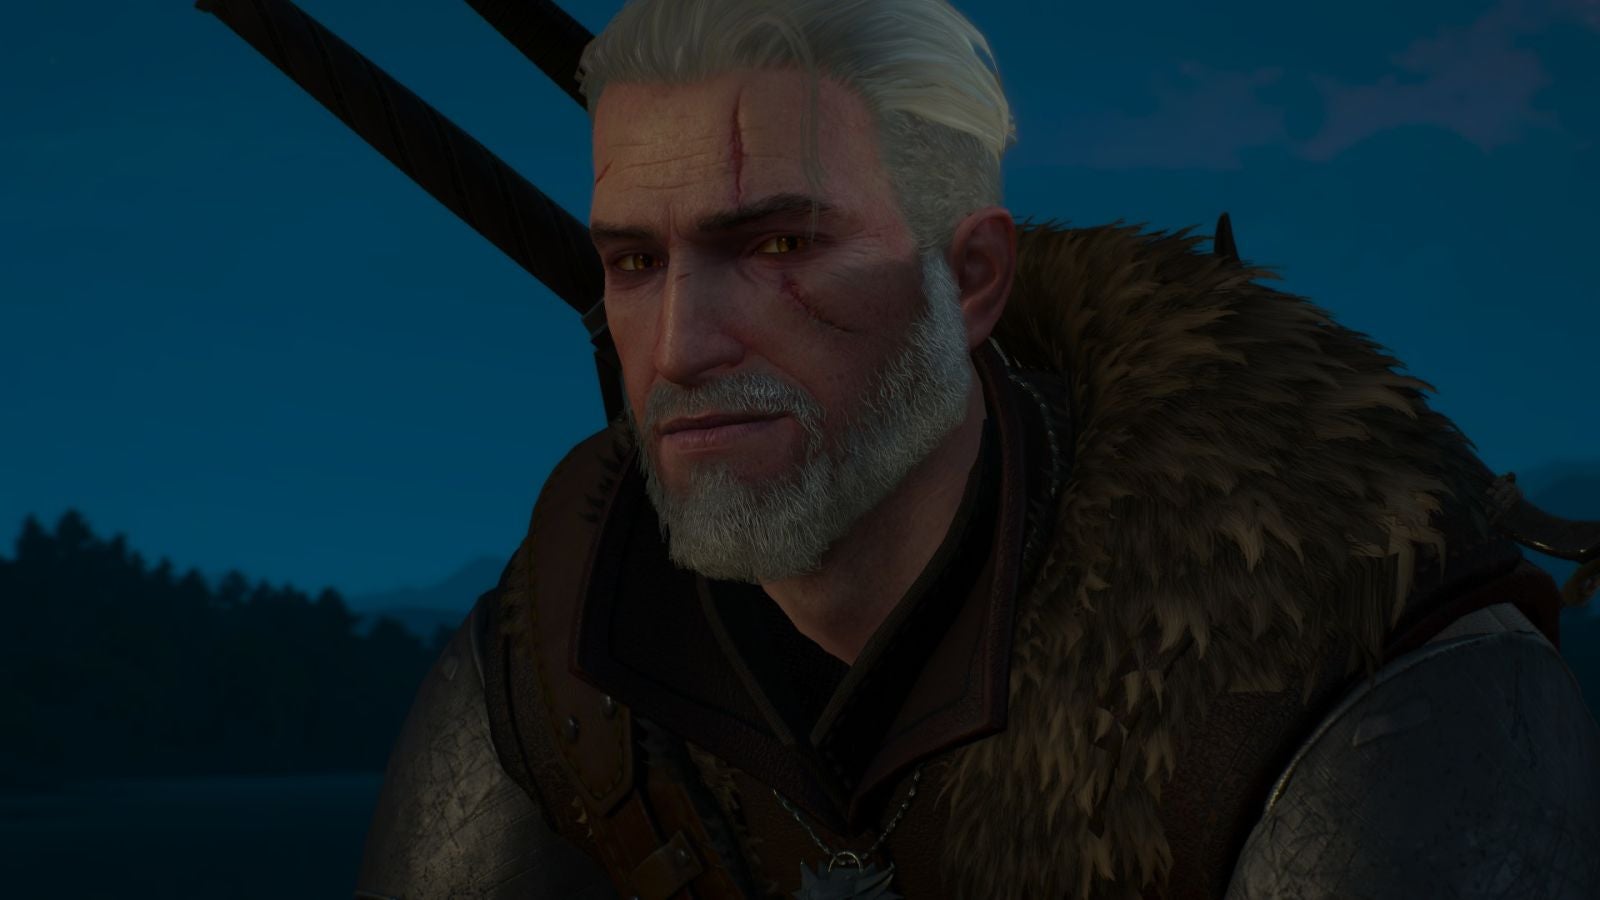 Modded Witcher 3 On Switch Allows PC Graphics Settings, 60FPS